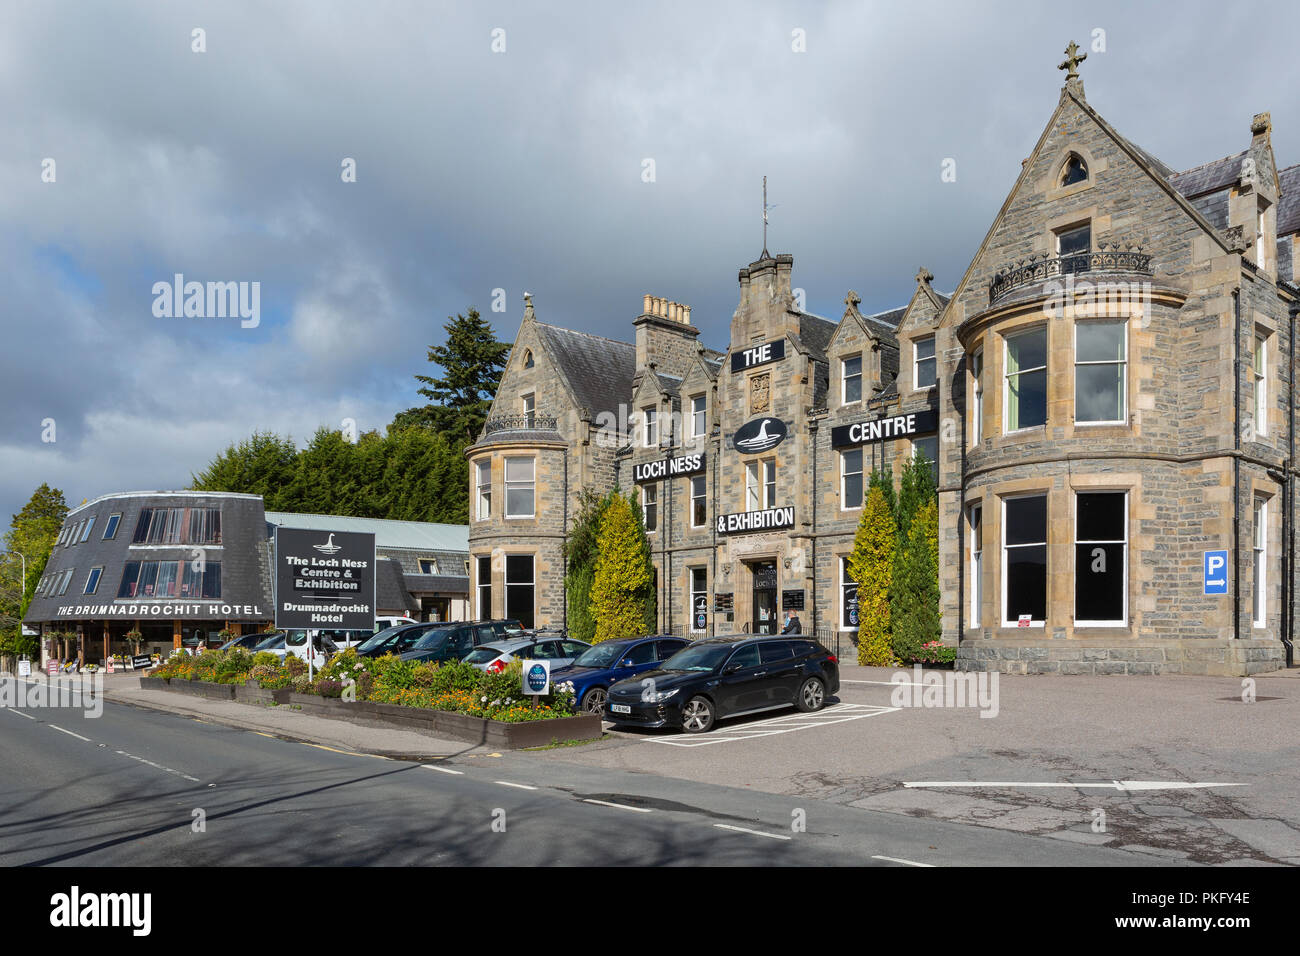 The Loch Ness Exhibition Centre and the Drumnadrochit Hotel on the A82 at Drumnadrochit, Highland Region, Scotland, UK Stock Photo